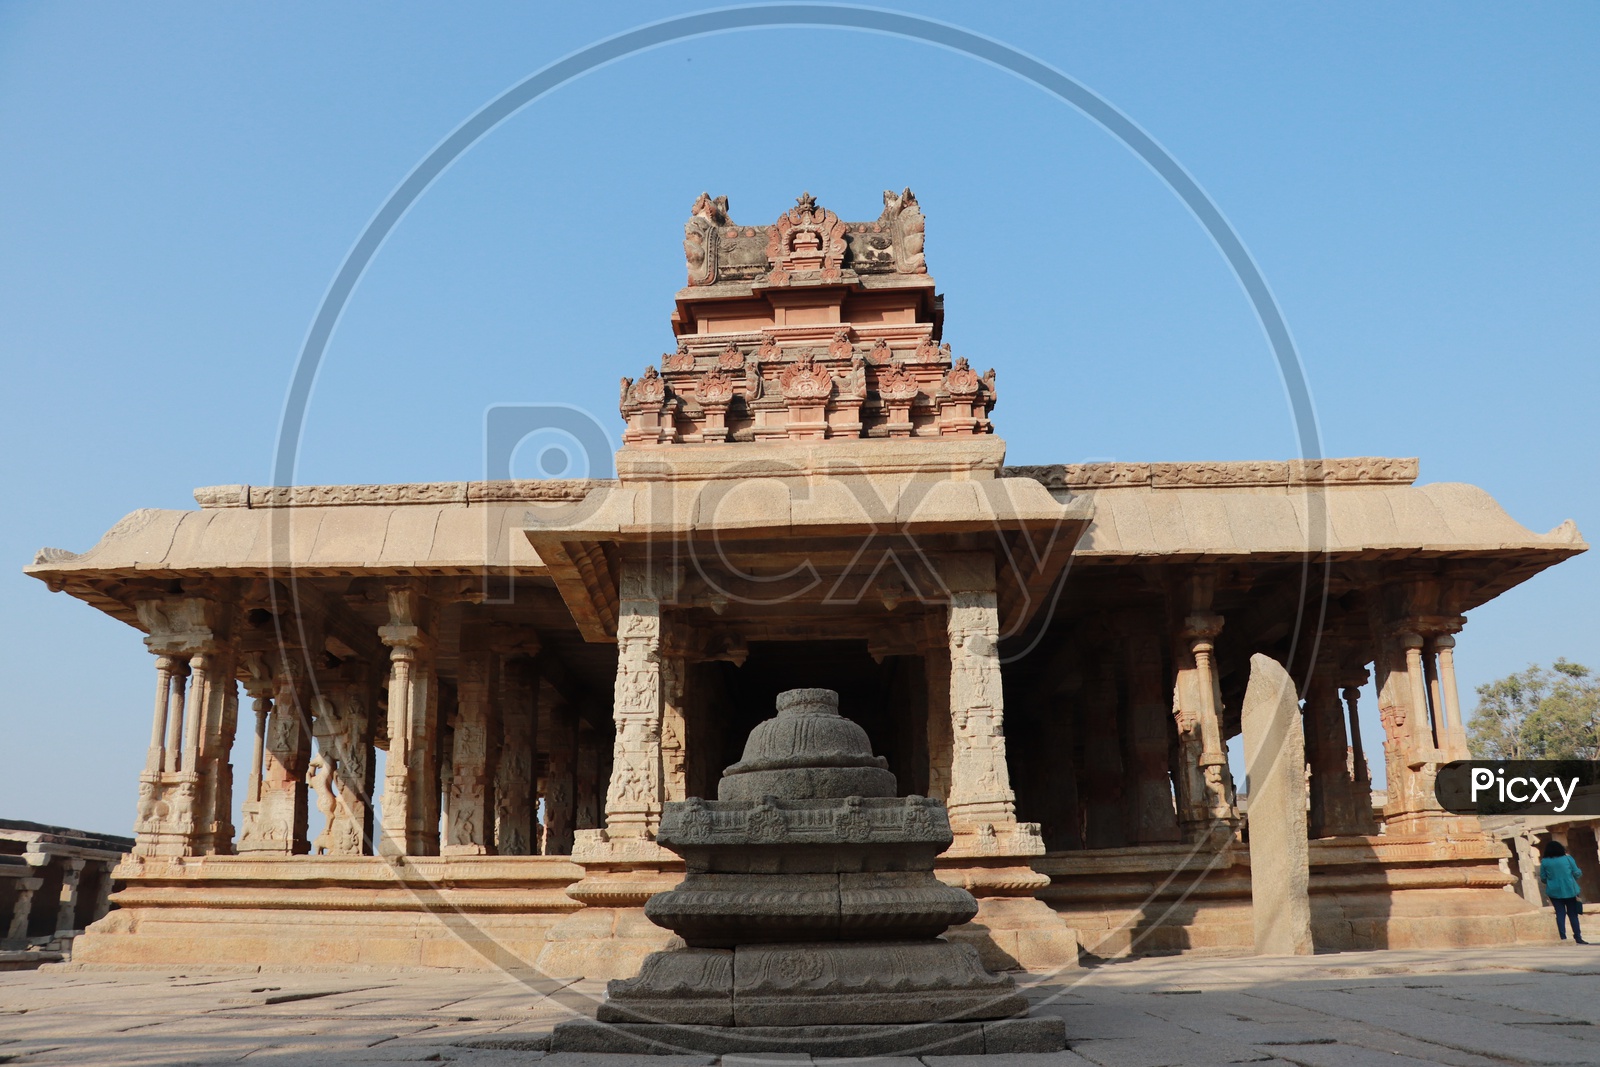 Architecture of a Temple